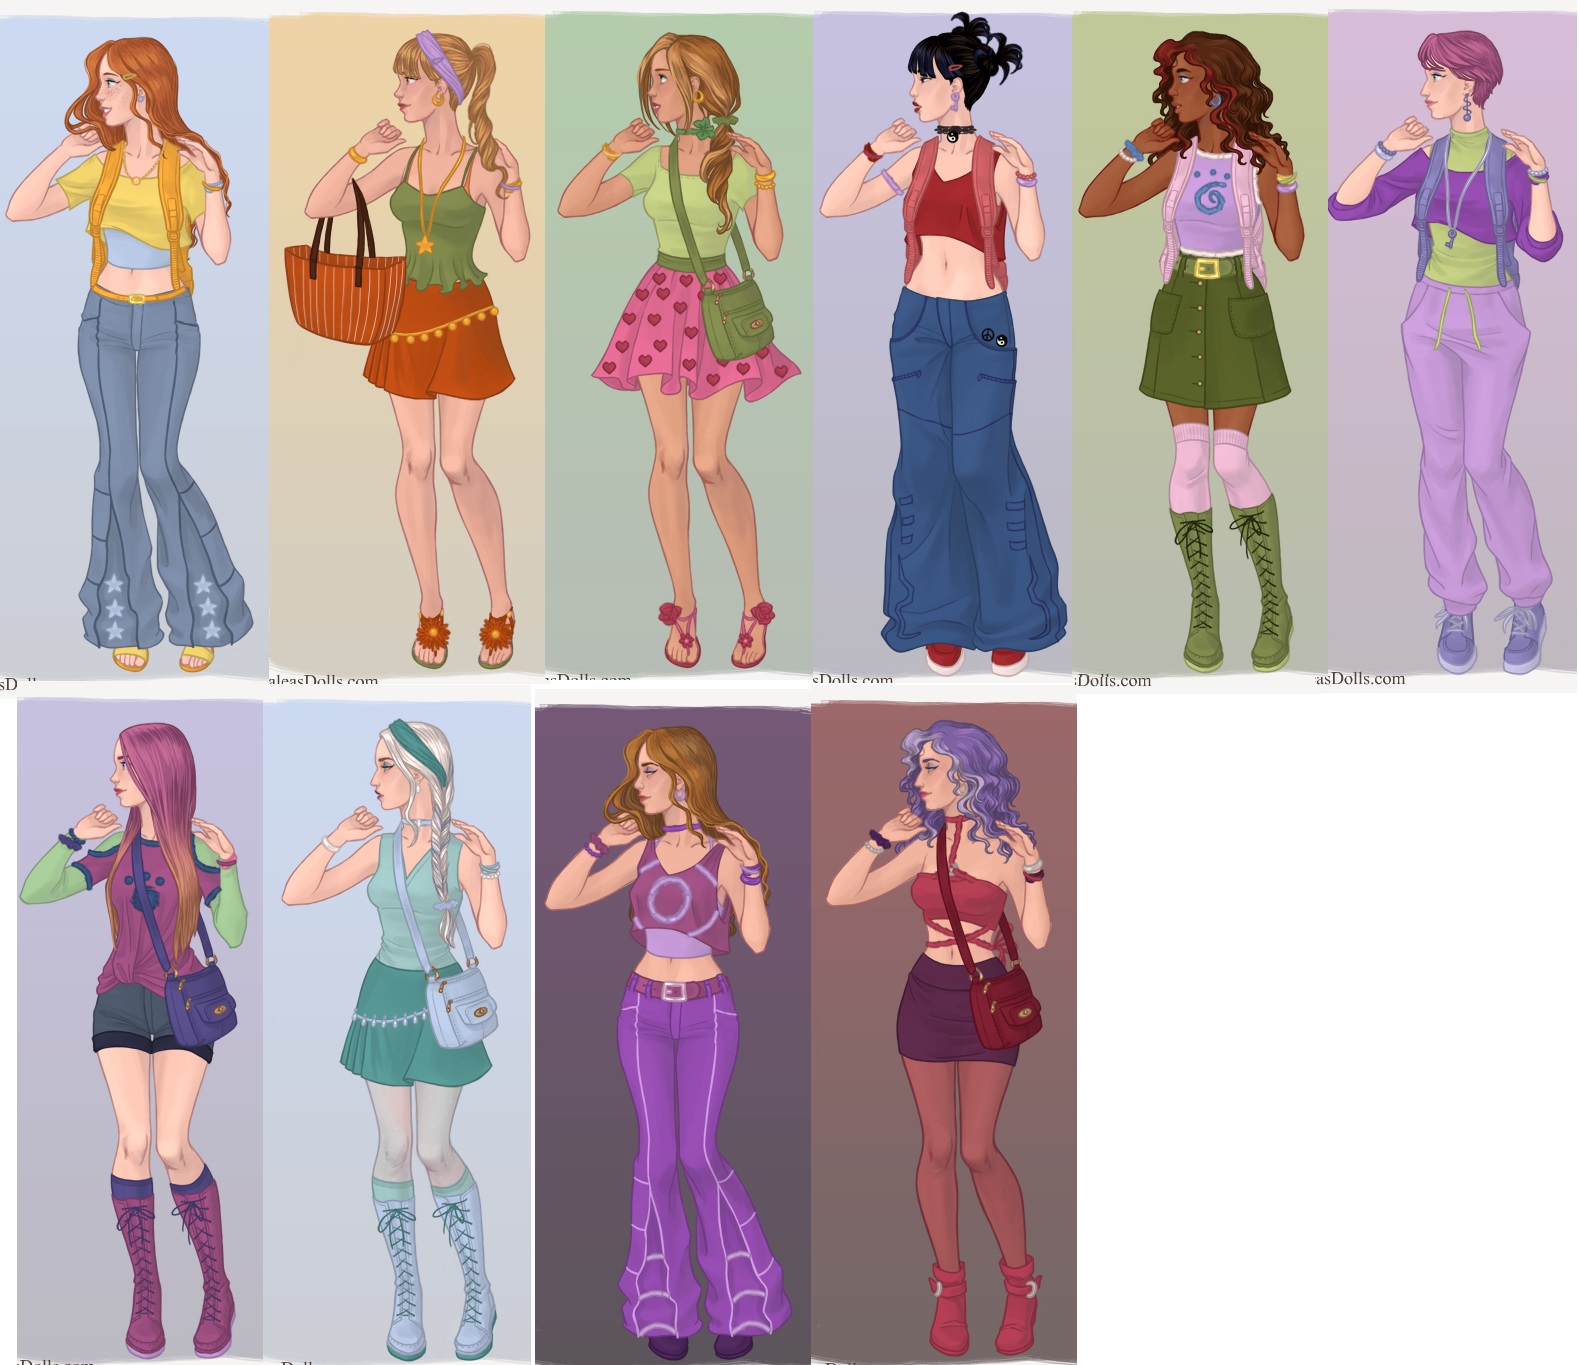 winx girls in modern casual clothes by adrianaTheGirlOnFire on